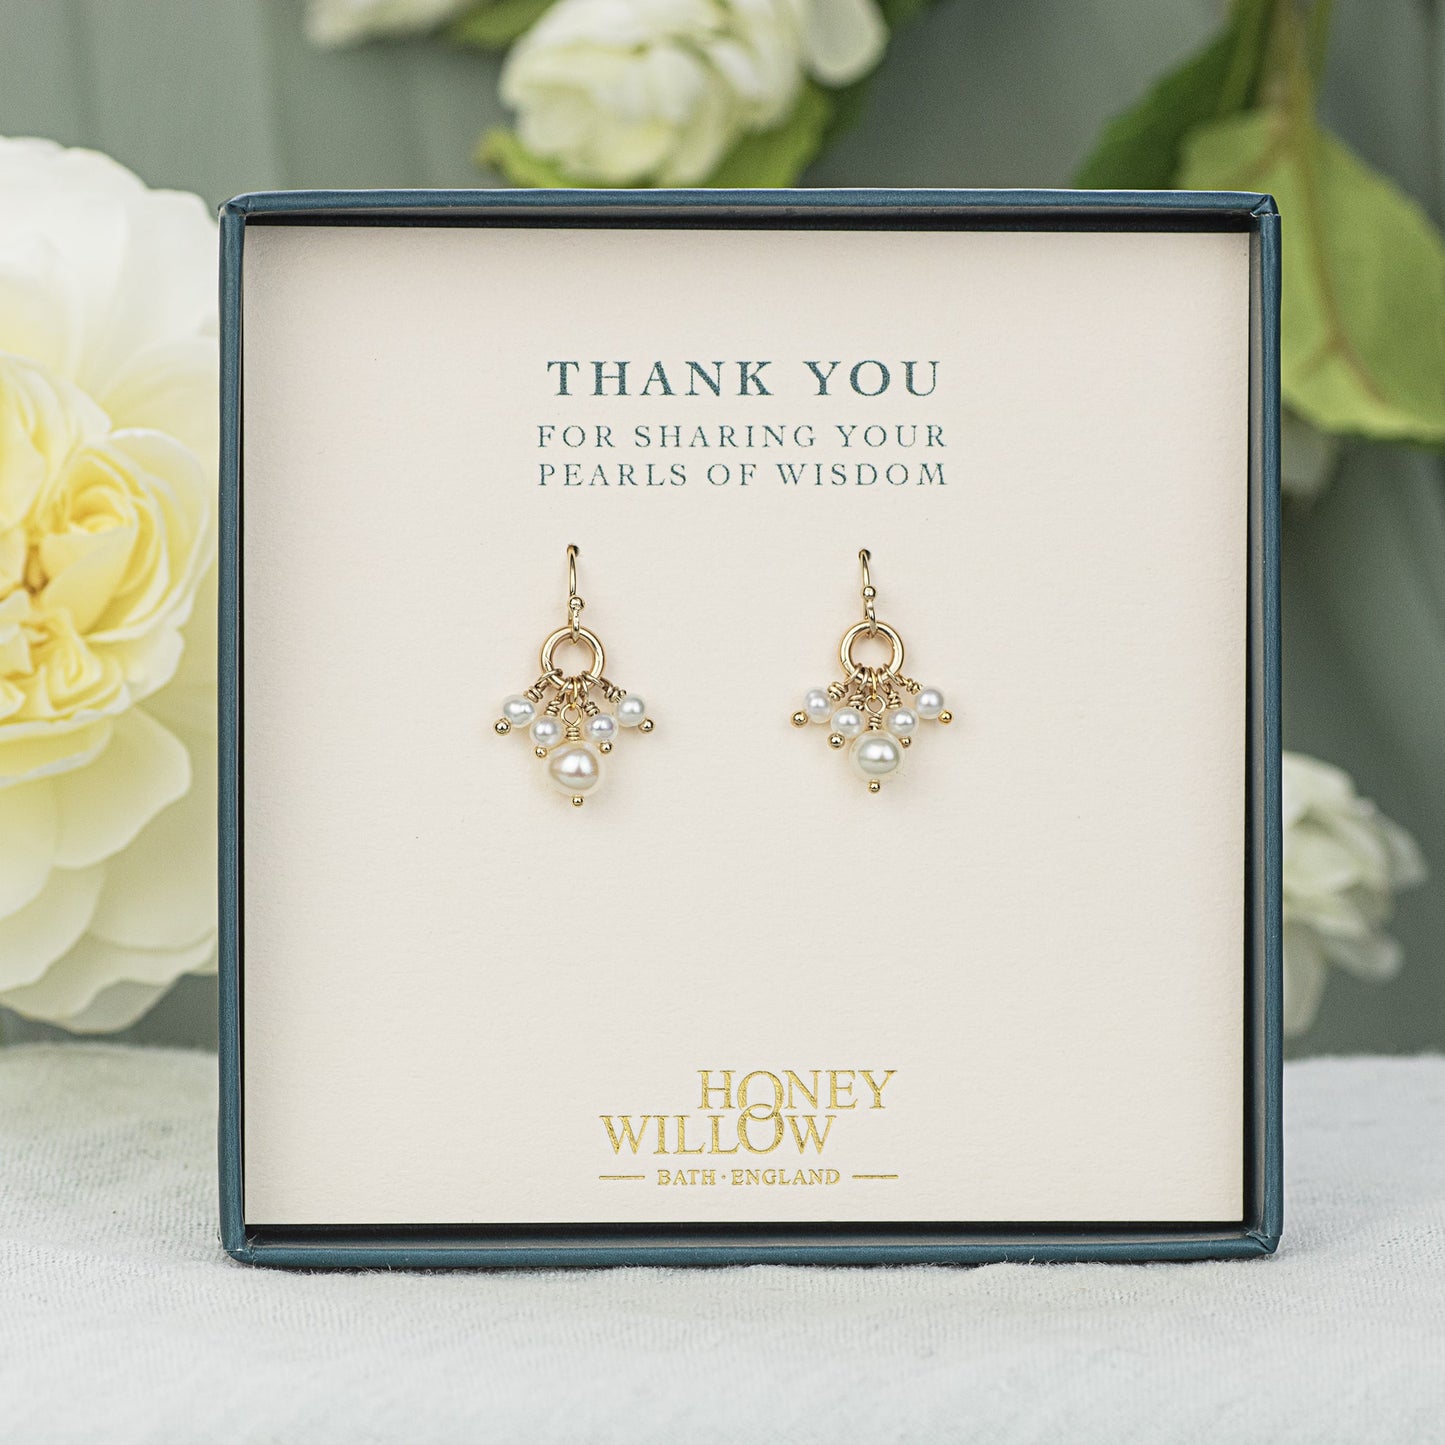 Thank You Gift For Teacher - Pearls of Wisdom Cluster Earrings